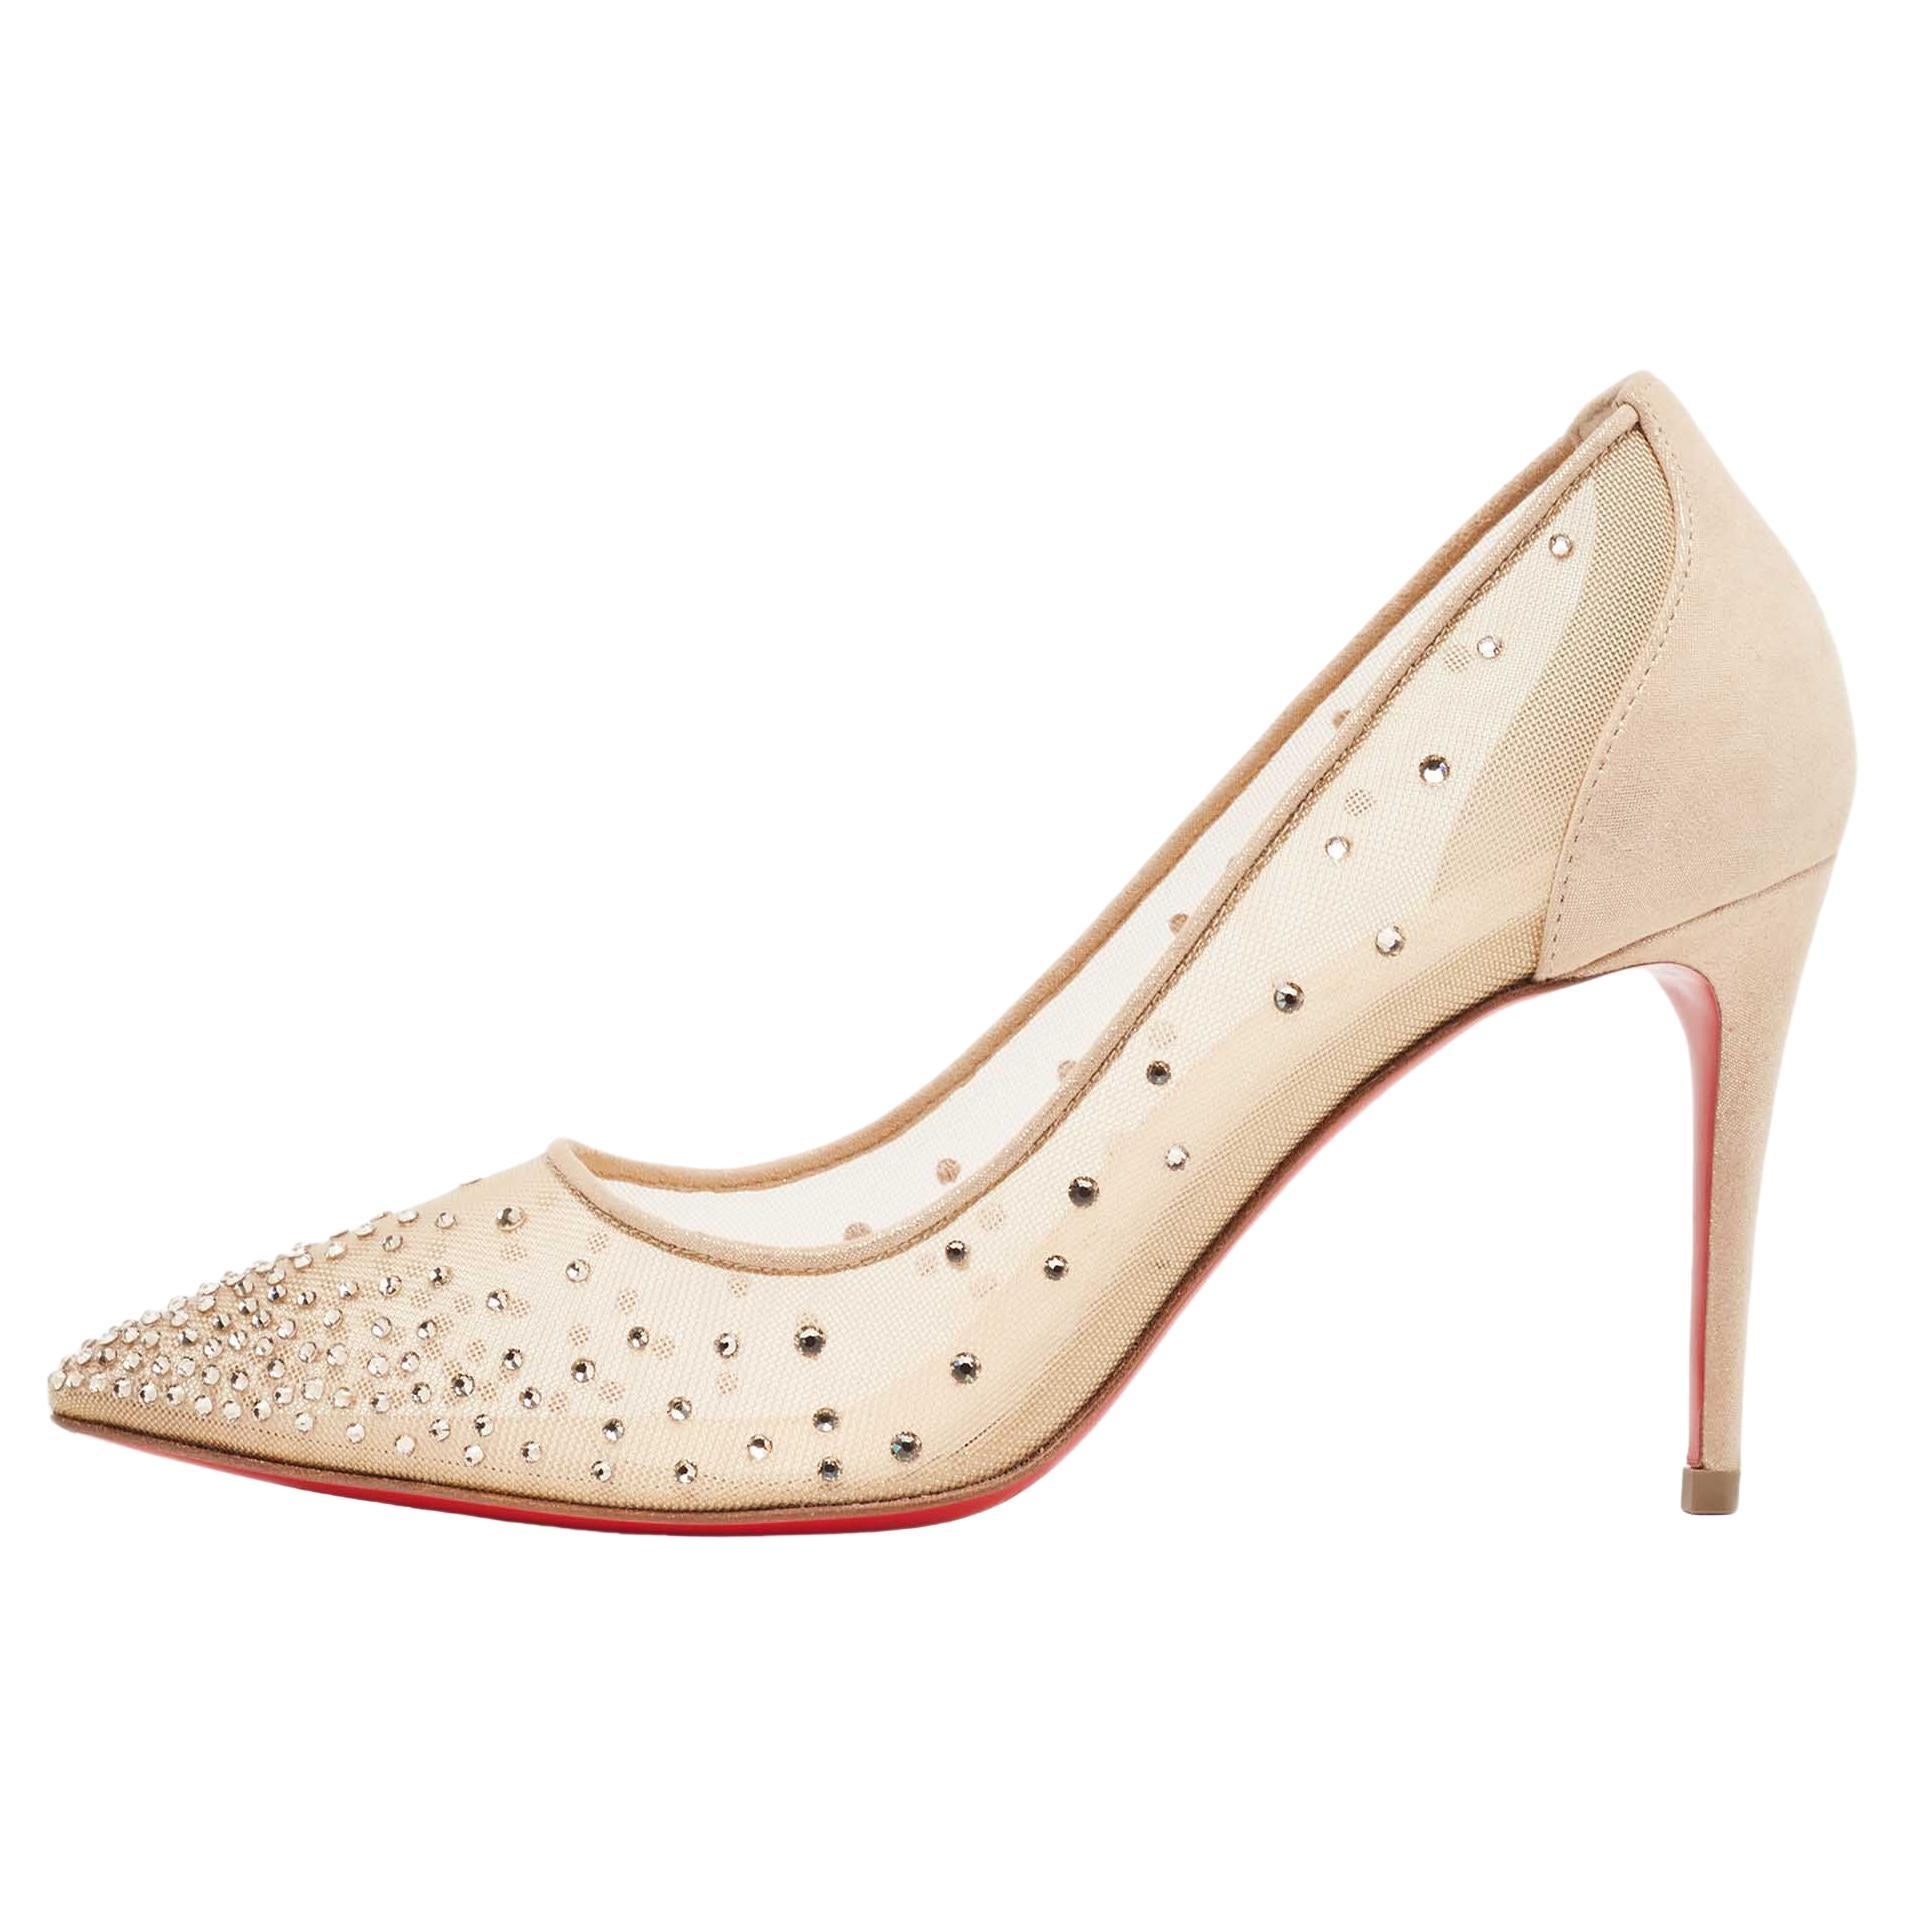 Christian Louboutin Beige Mesh and Suede Follies Strass Pumps Size 37